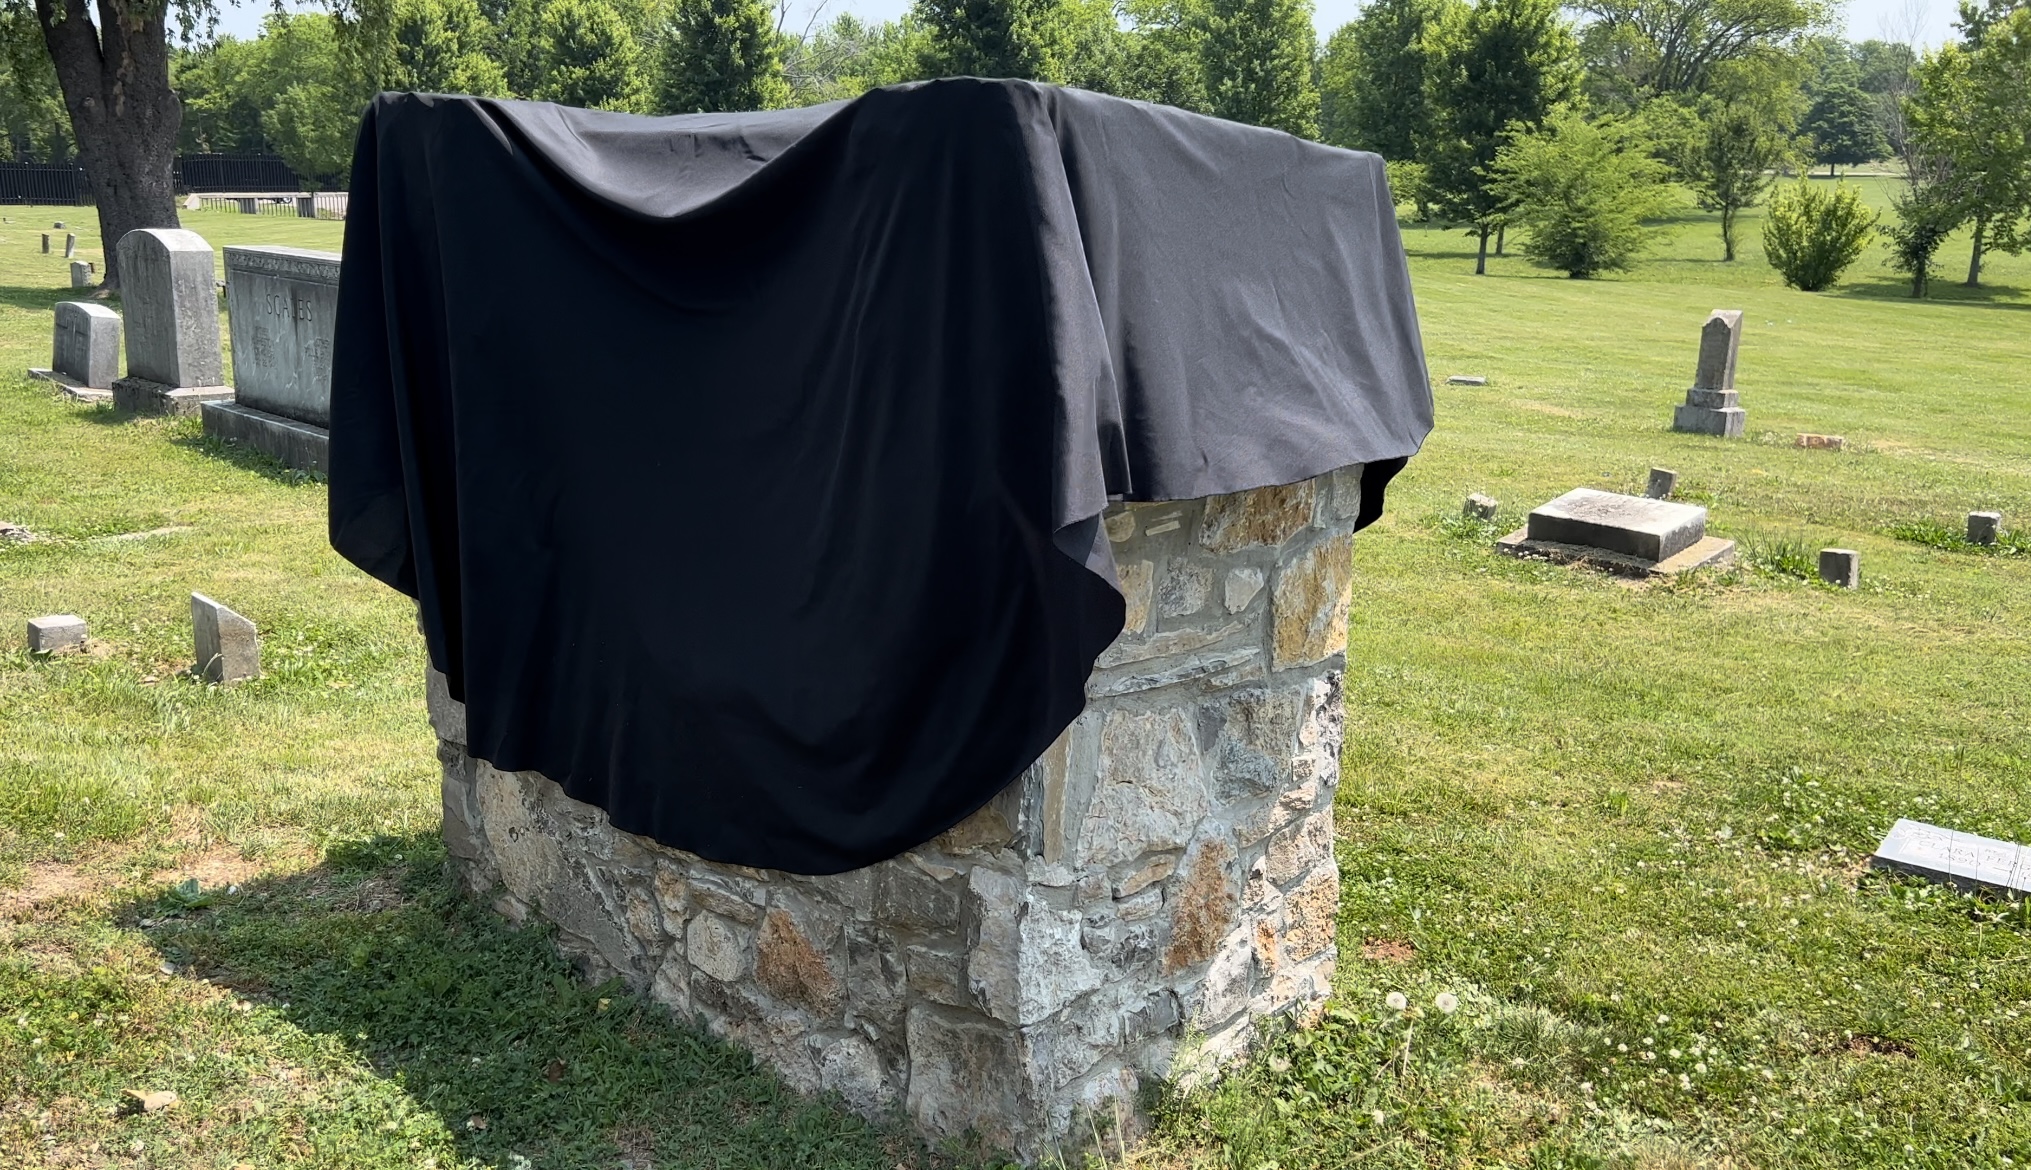 Join us on June 24, 2023 at 10:00AM for the unveiling and dedication of a memorial to those enslaved on Oaklands Plantation